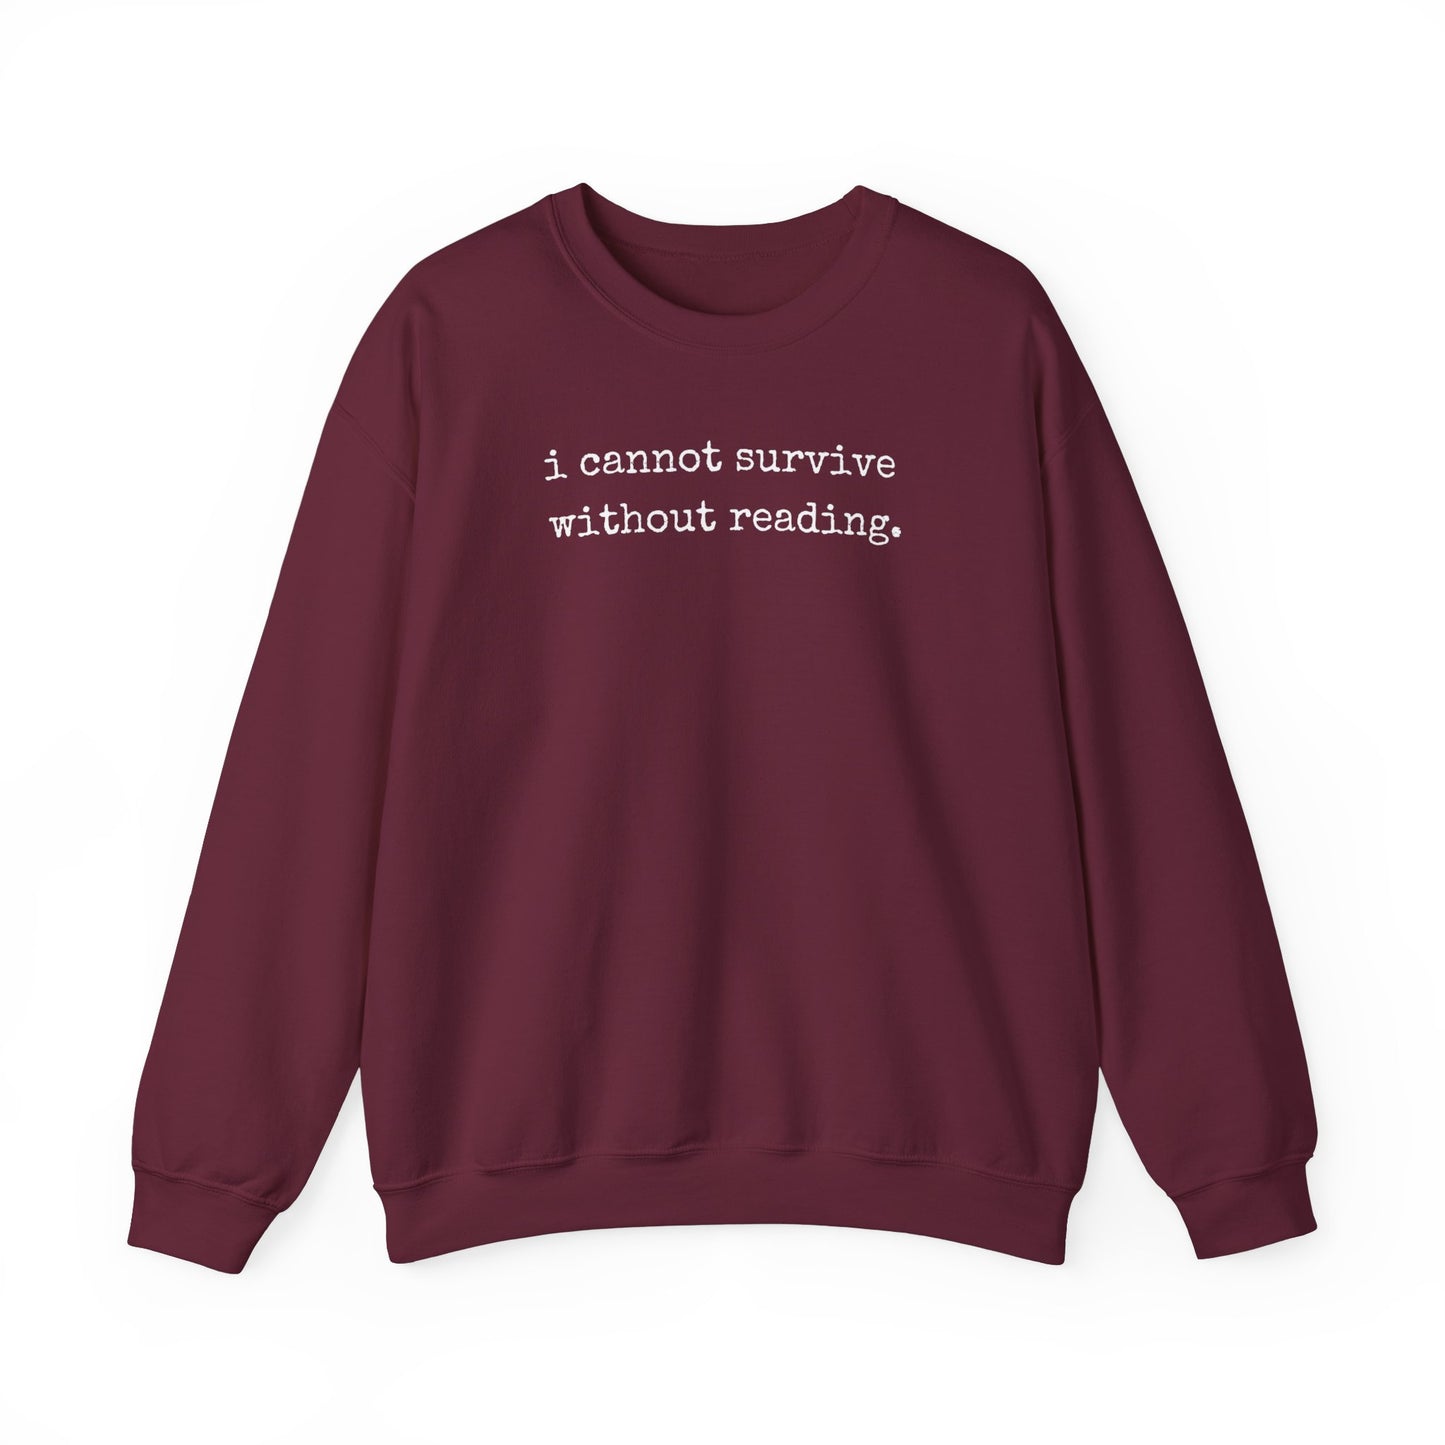 I Cannot Live Without Reading Oversize Sweatshirt Gift for Her Him Book Lover Bookworm Read More Books Banned Books Shirt Hoodie